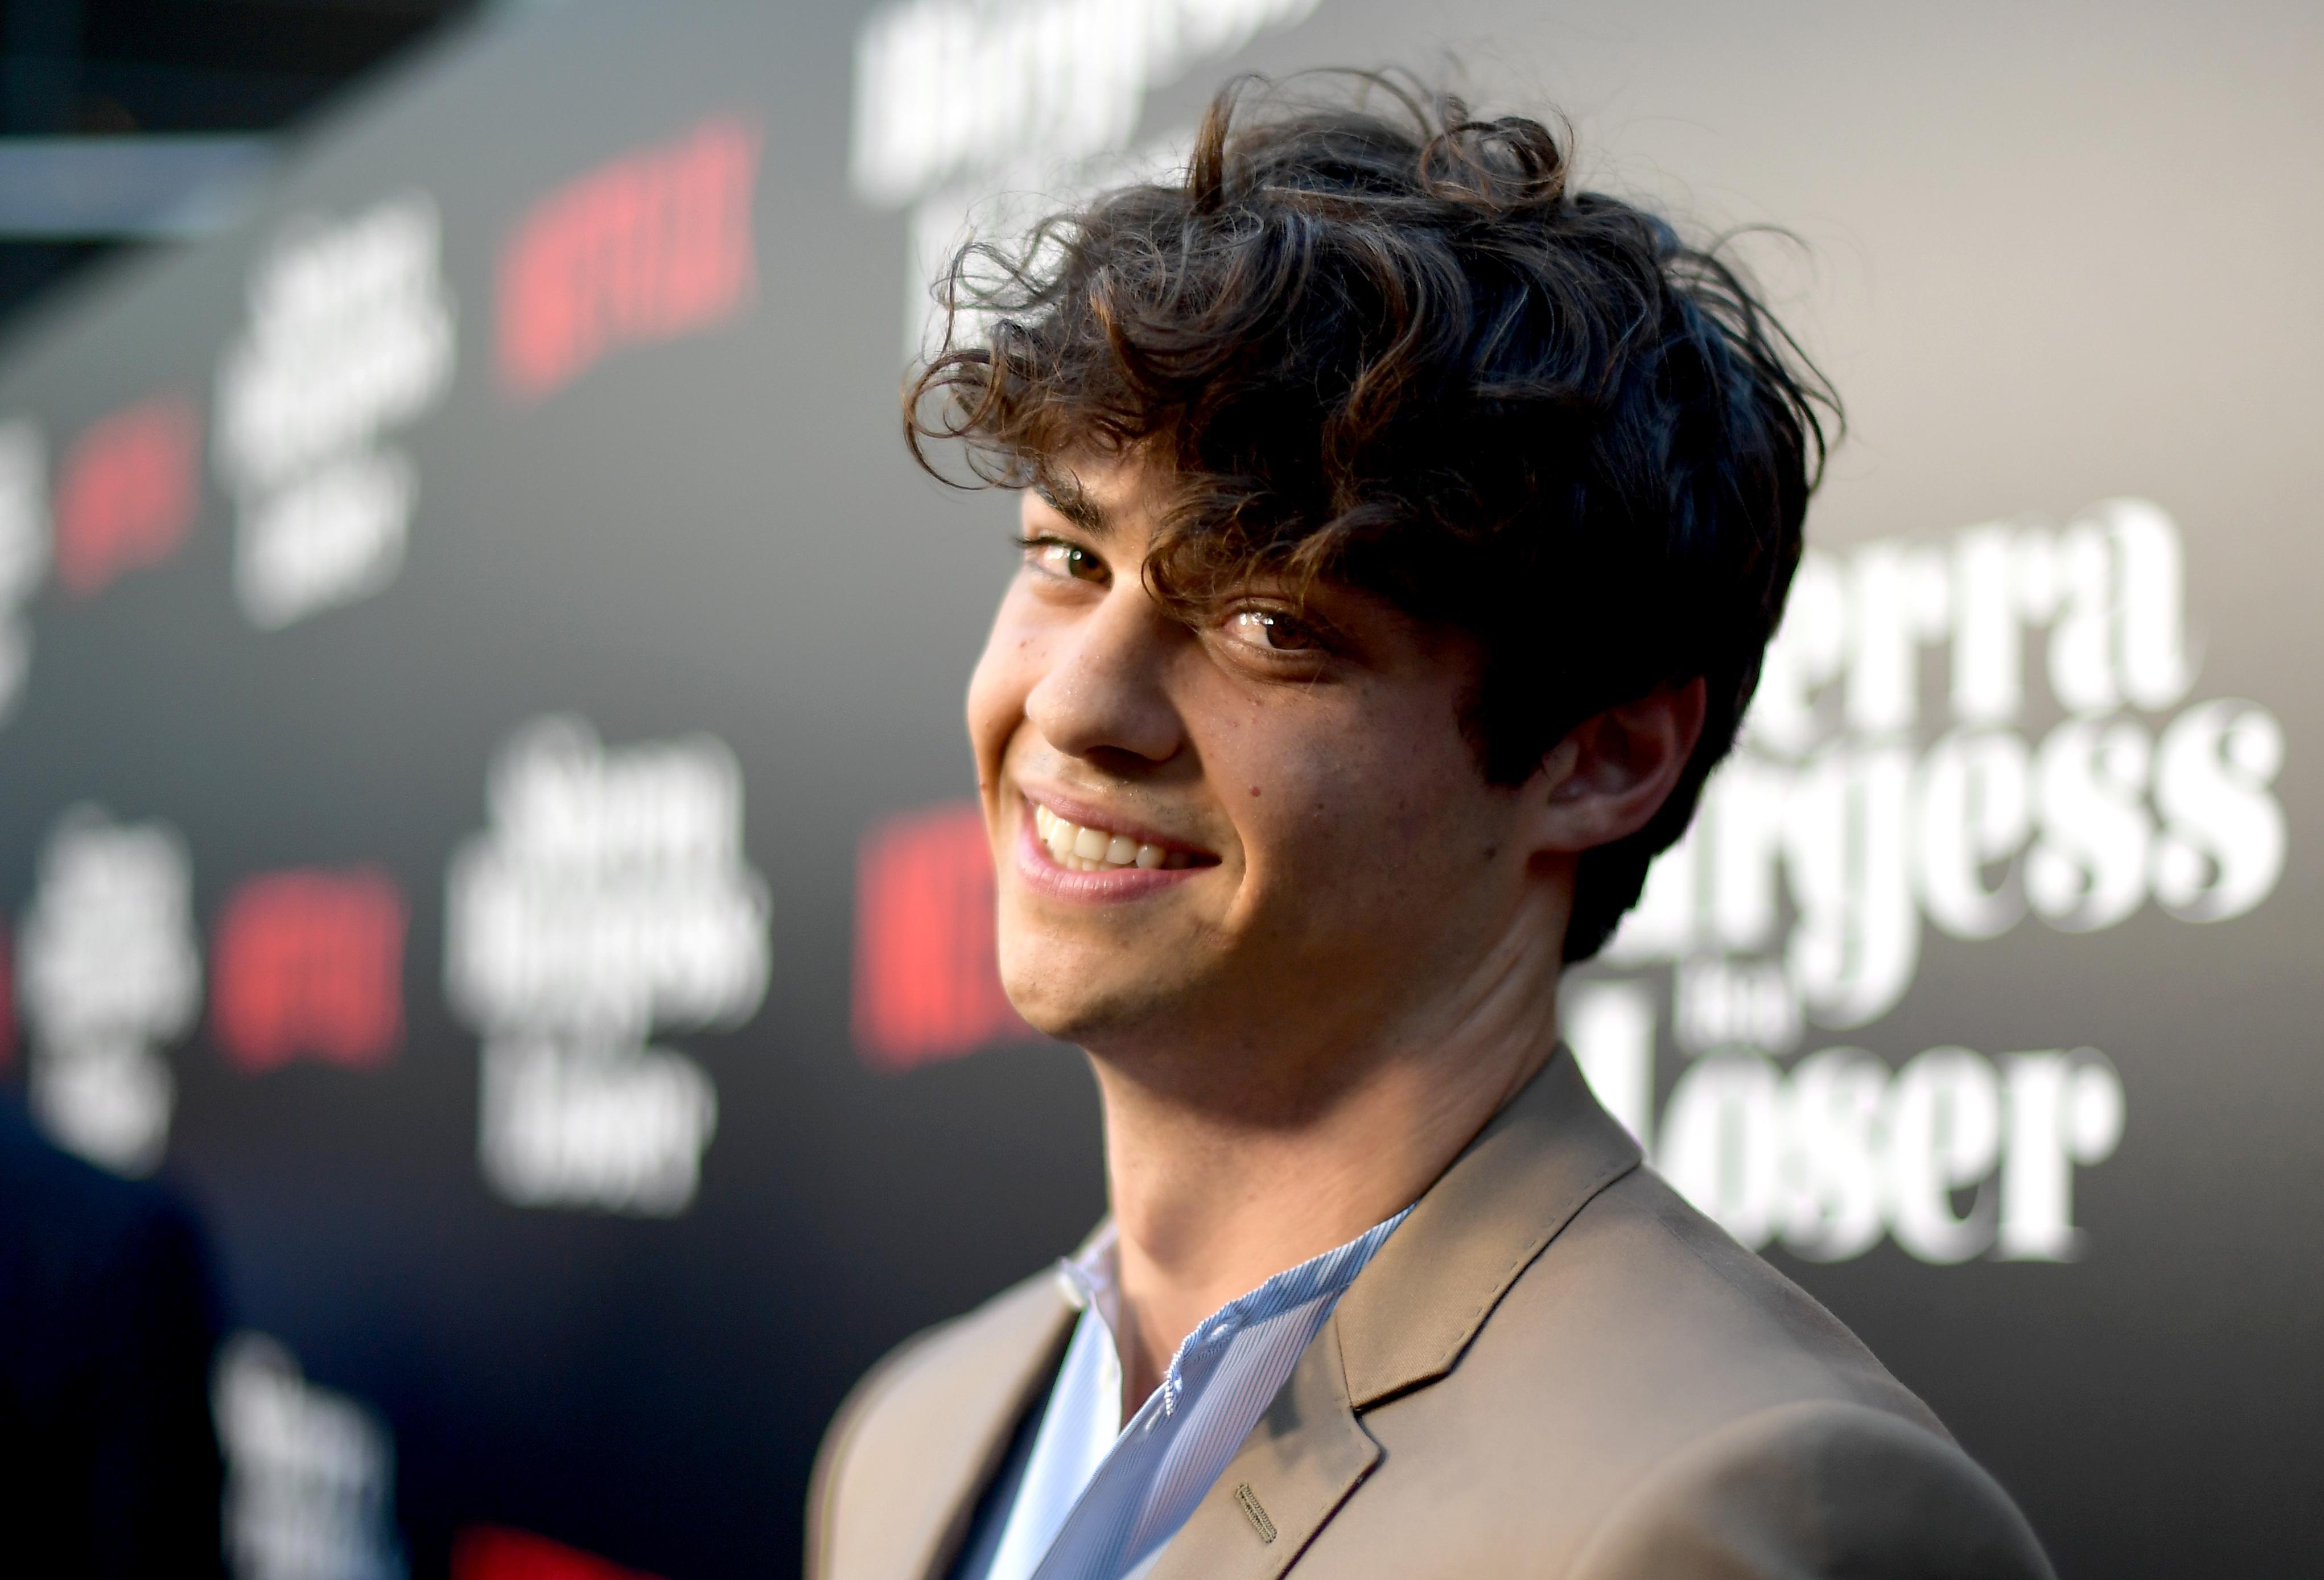 Noah Centineo's Relationship Status Has Been Confirmed, Answering